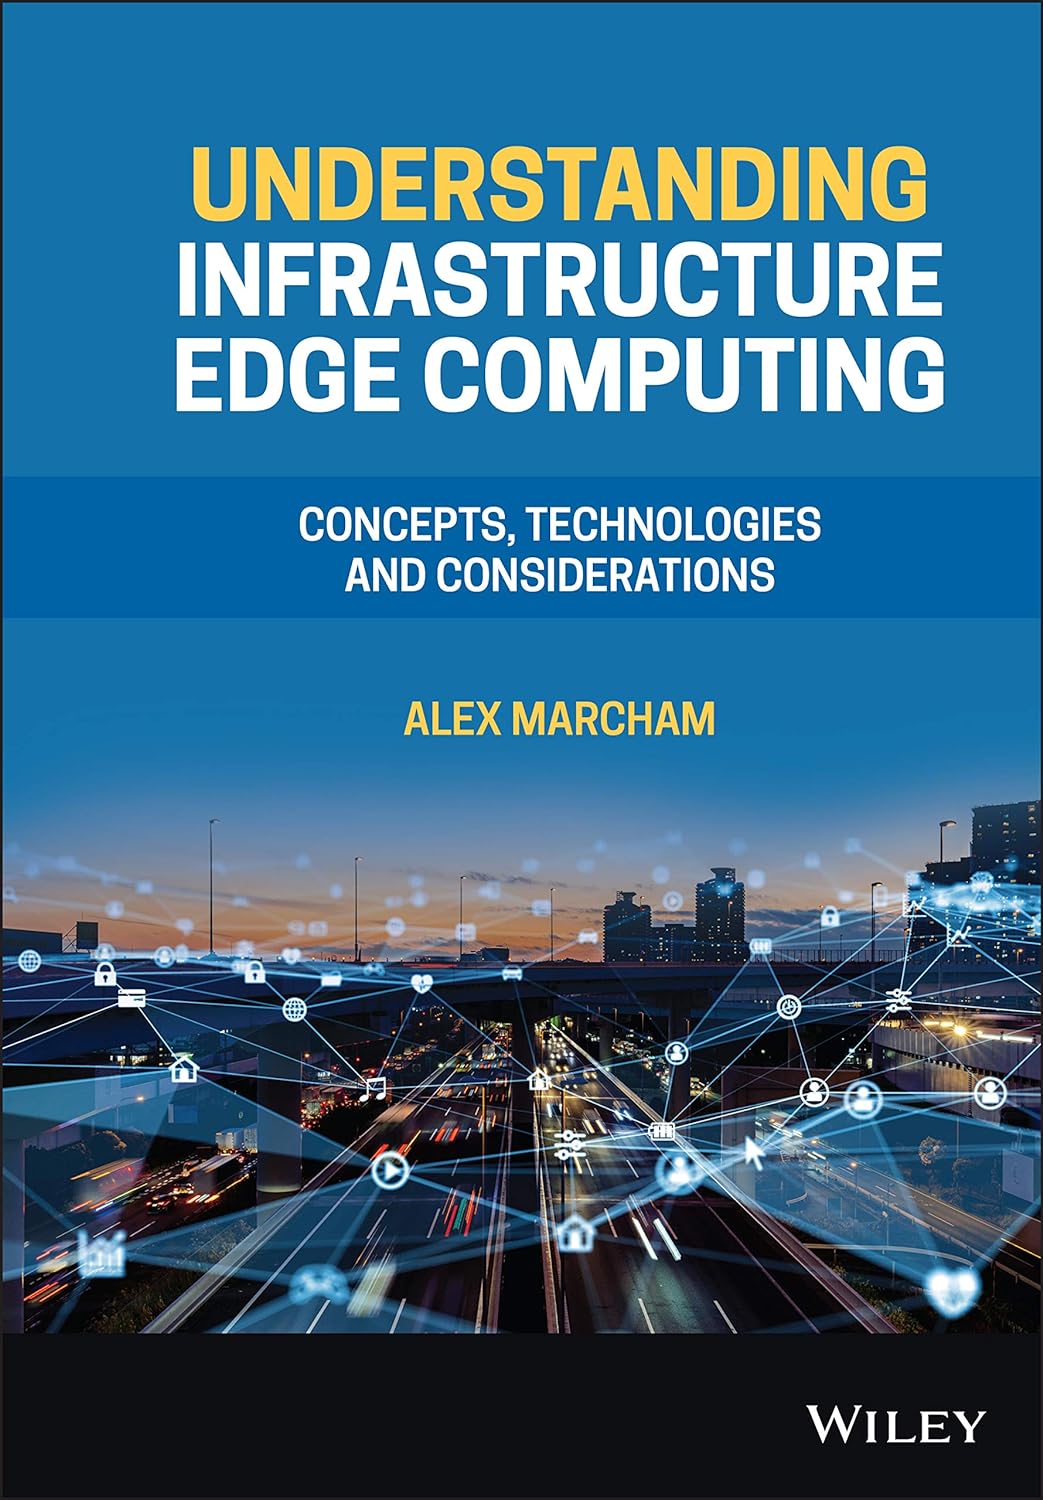 (EBook PDF)Understanding Infrastructure Edge Computing: Concepts, Technologies, and Considerations by Alex Marcham